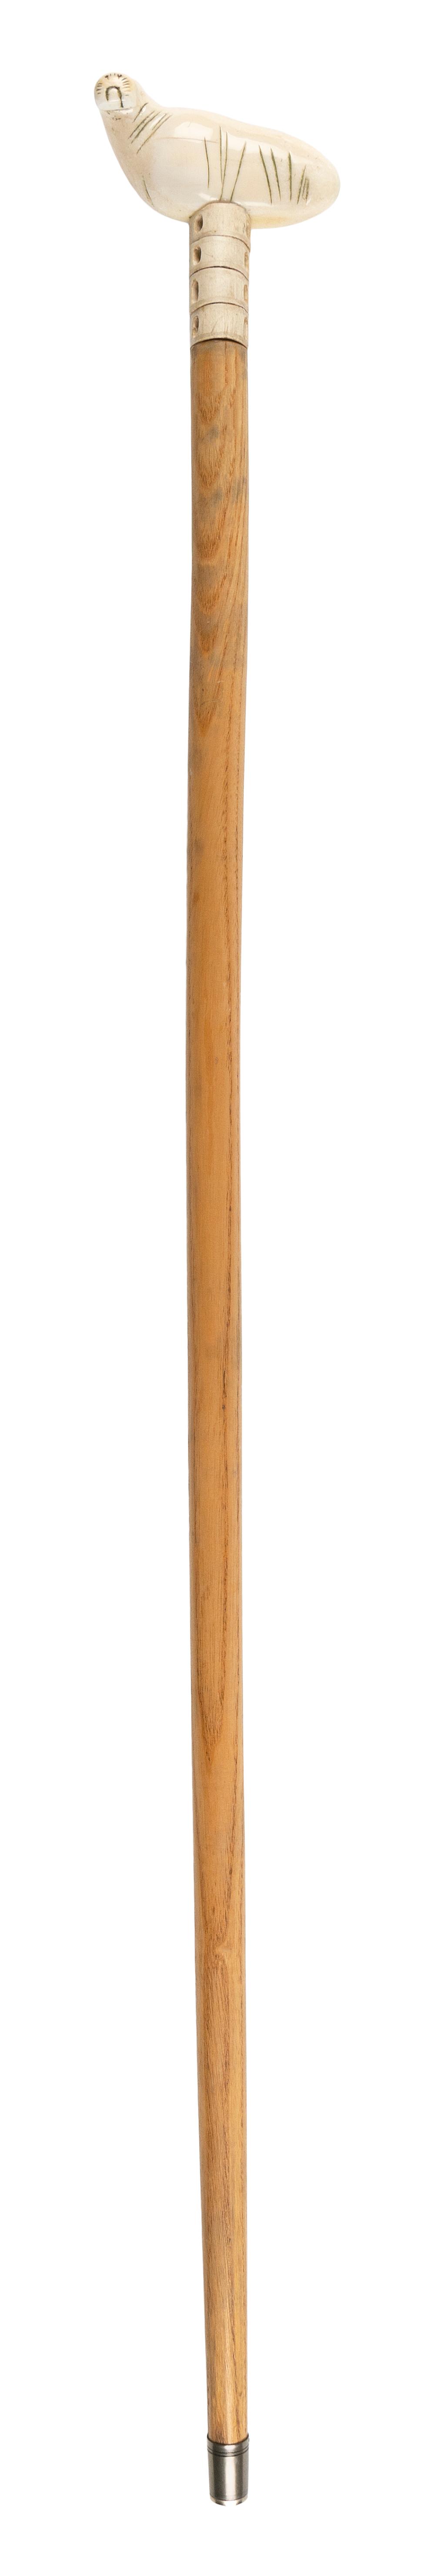 WALKING STICK WITH WALRUS FORM 34f028